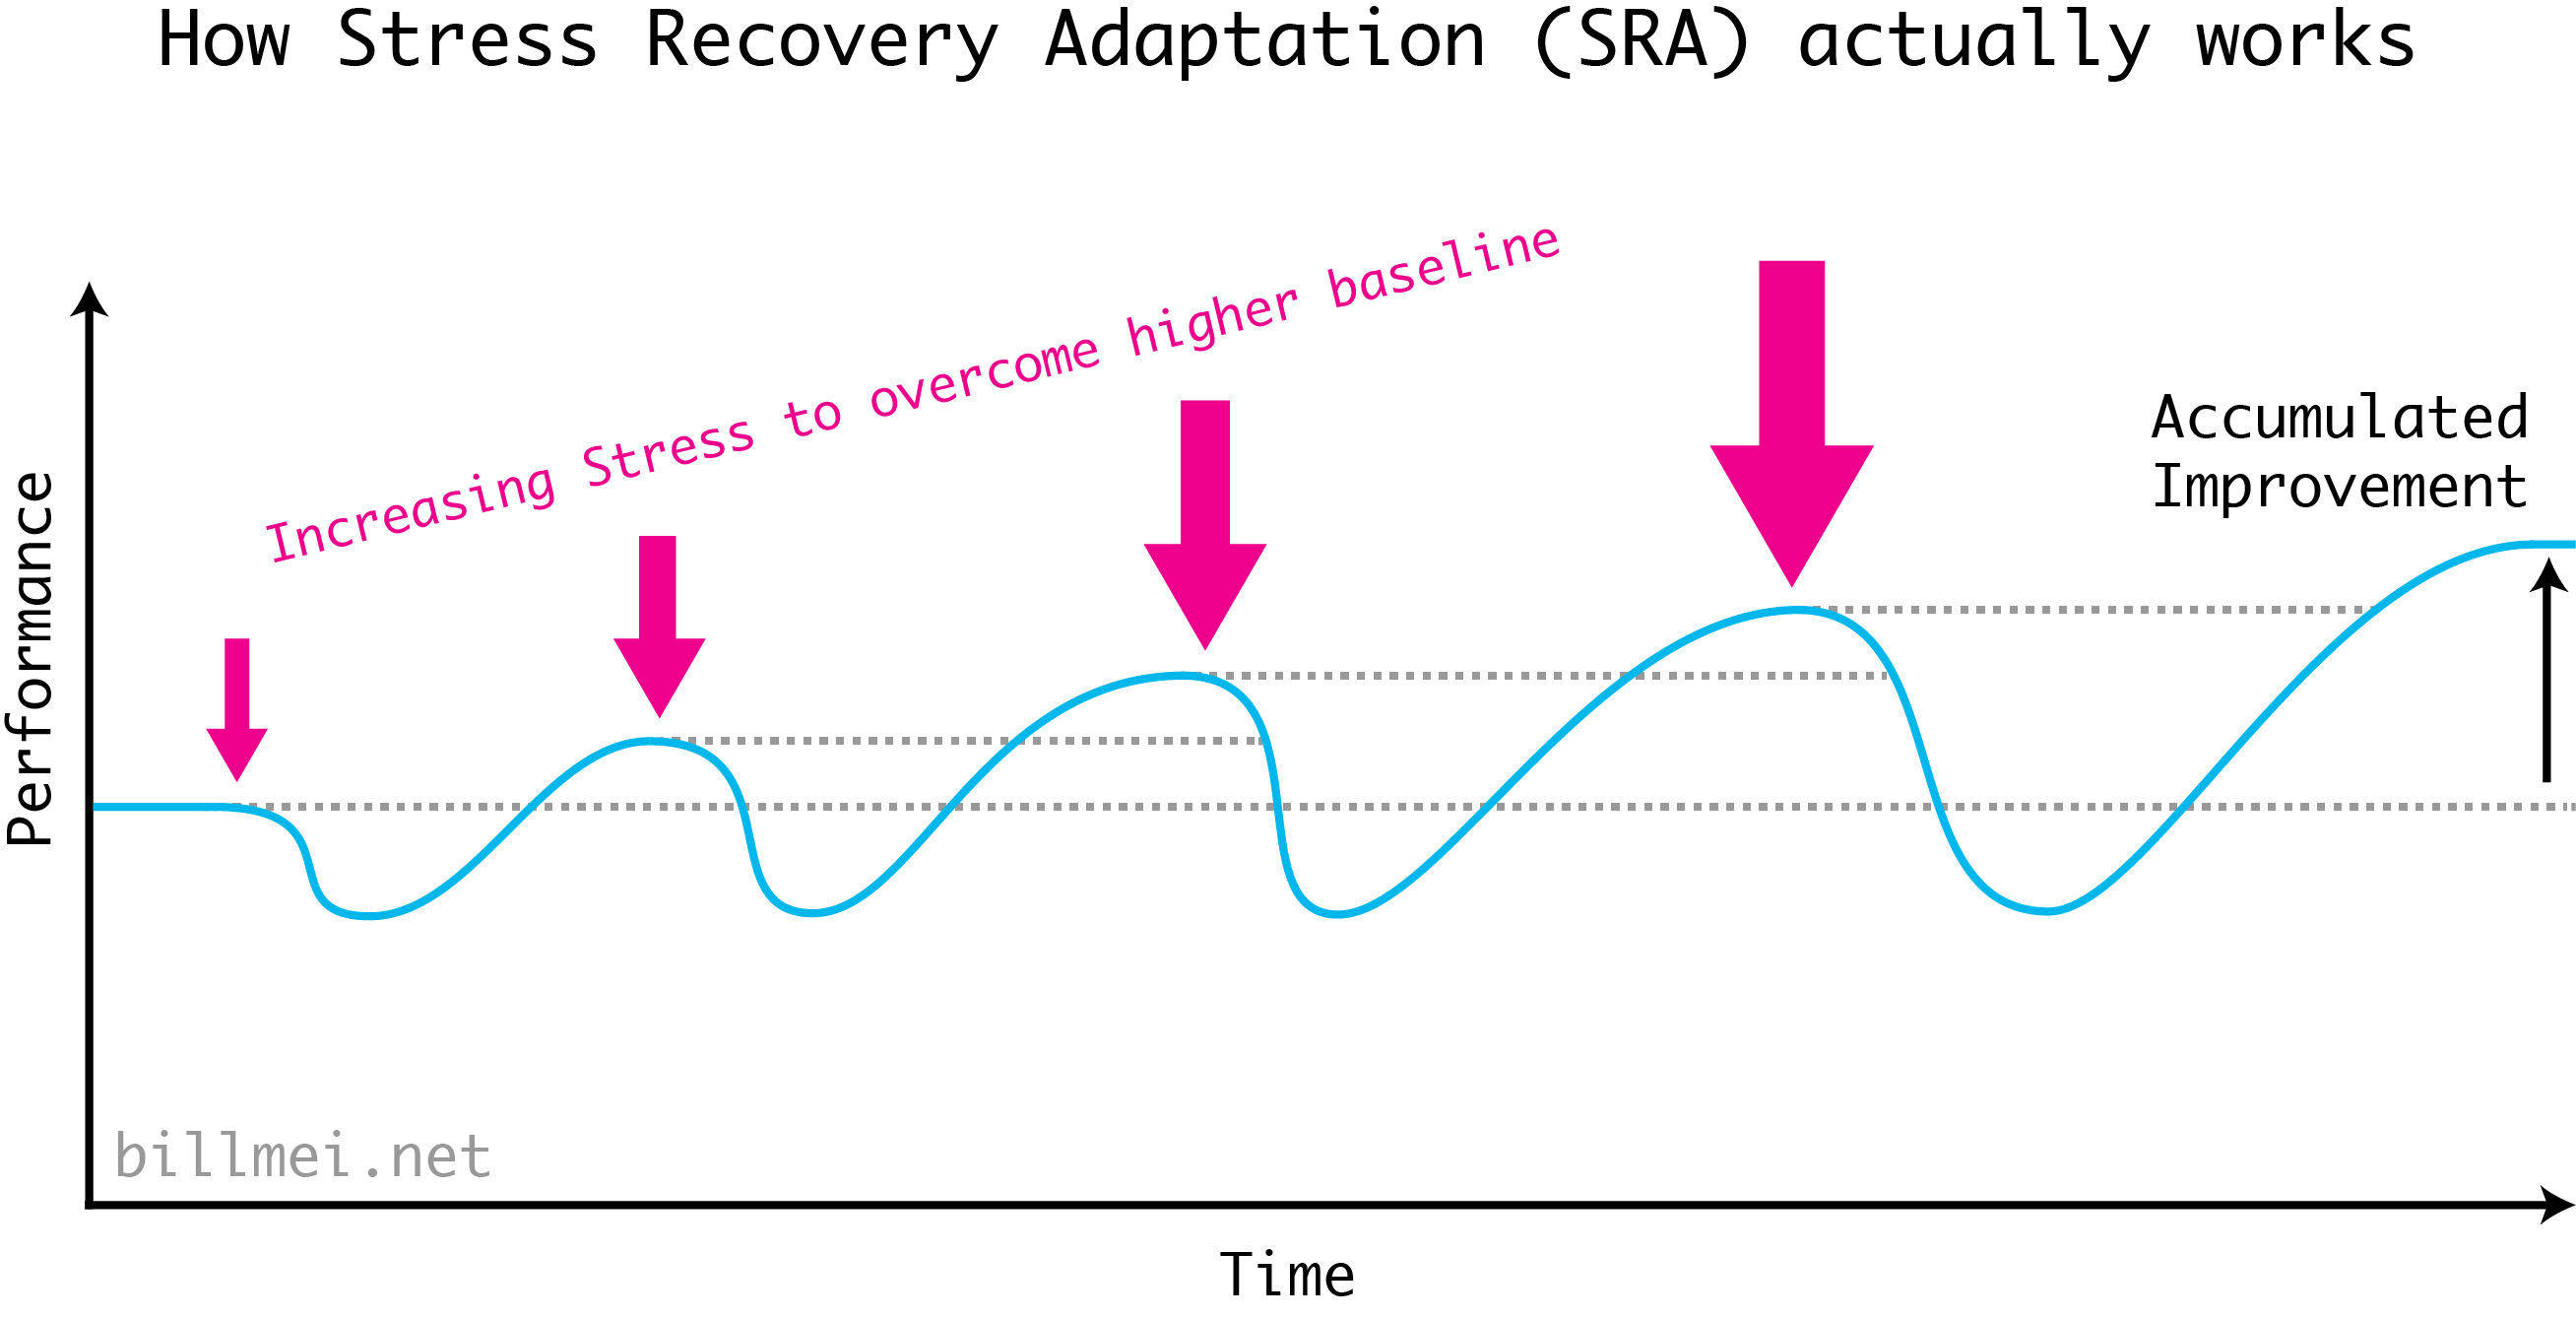 How the Stress Recovery Adaptation (SRA) cycle actually works. The second time after a workout, you've already achieved a higher baseline, so in order to overcome this to achieve an even higher baseline, you have to apply even more stress. Thus to accumulate improvement, the stress you apply is getting larger and larger over time.